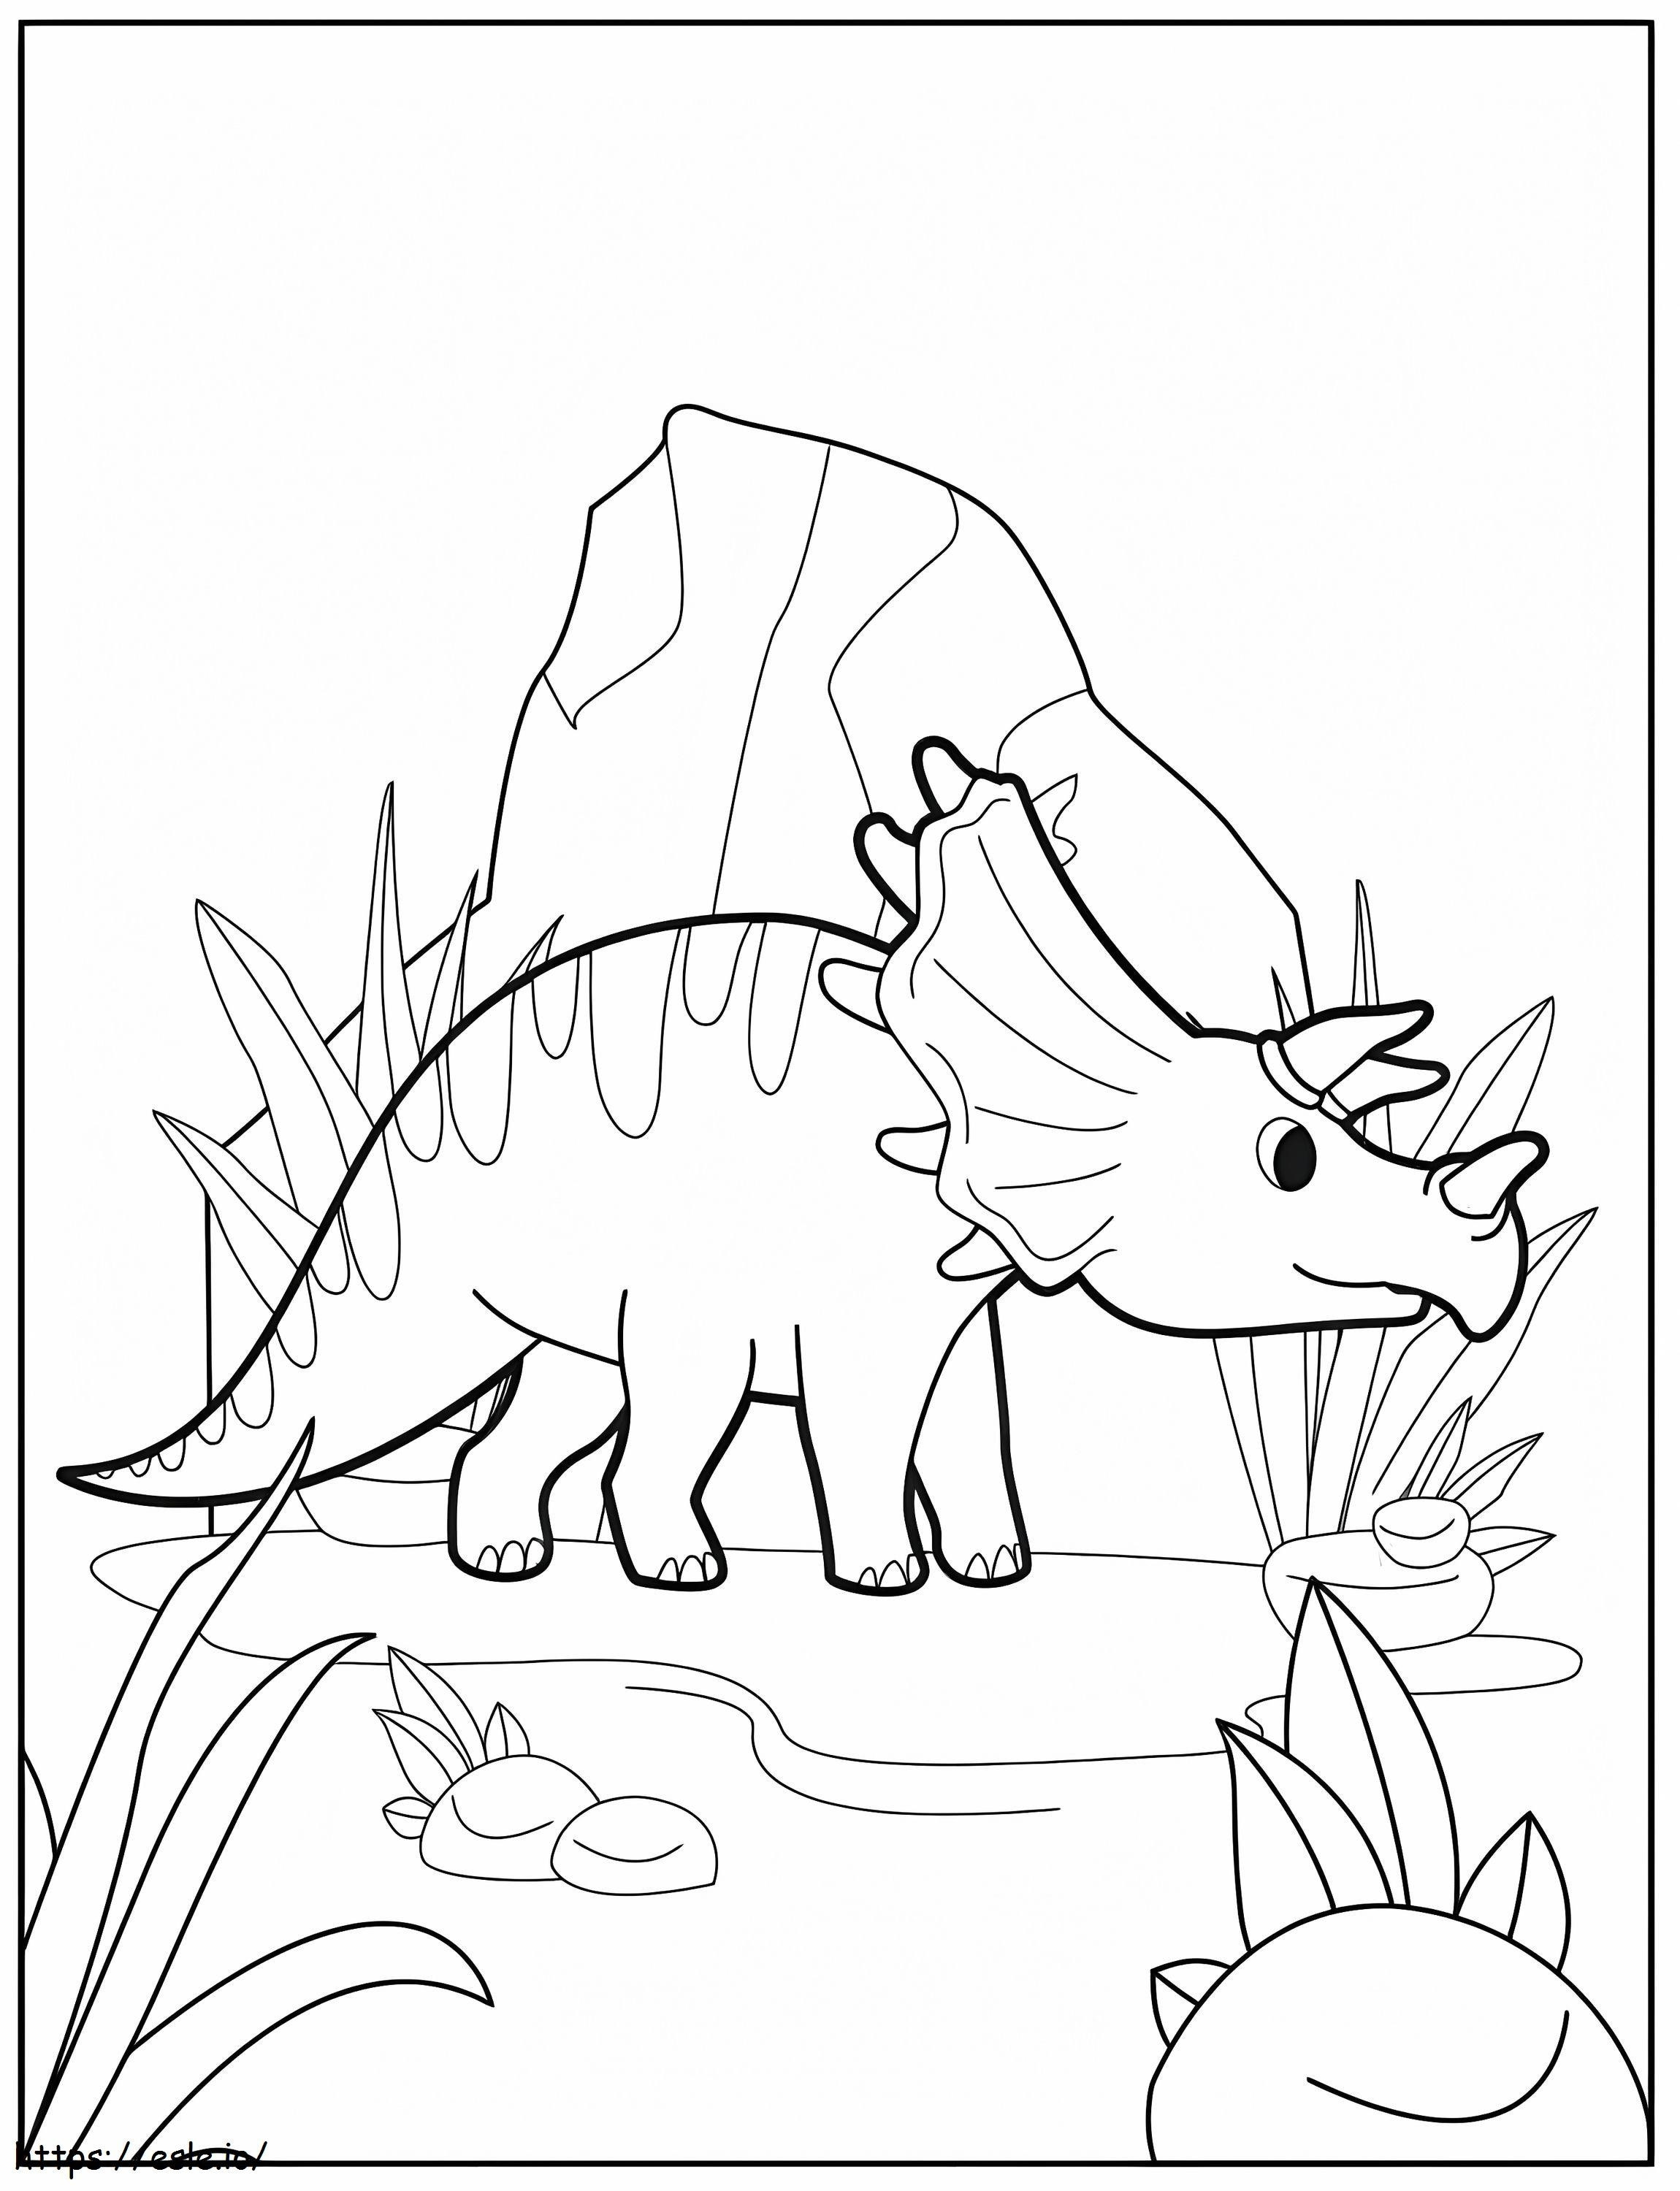 Cartoon Triceratops coloring page